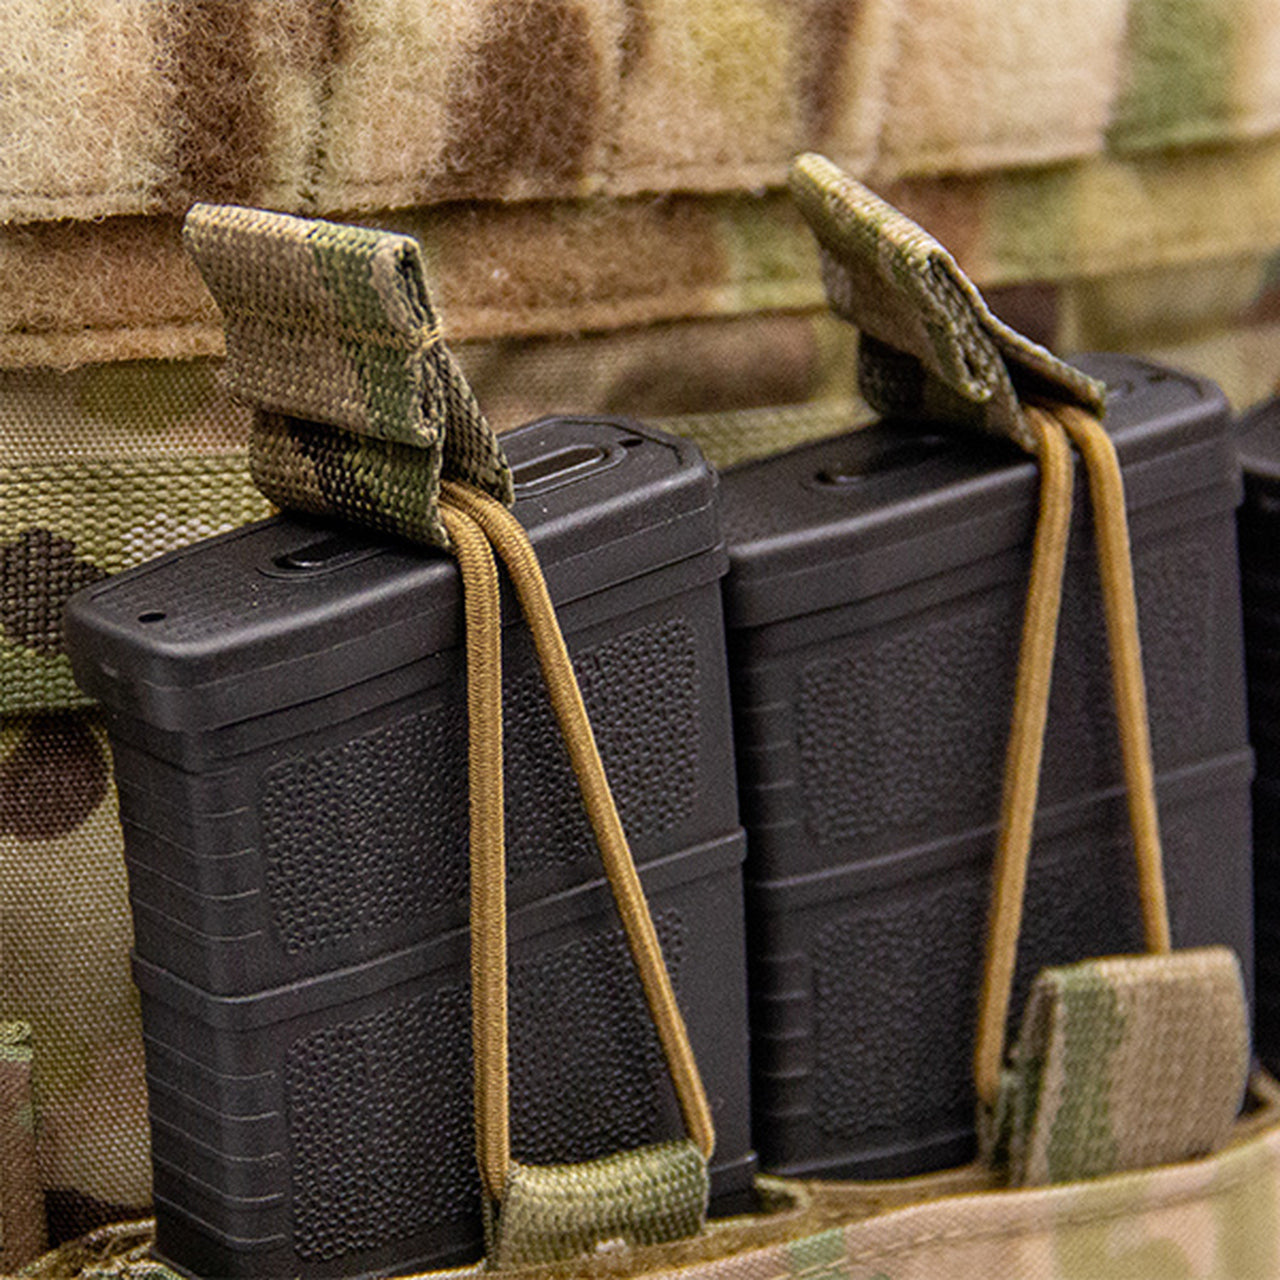 A modular and low profile multi-magazine pouch, designed to fit the Shellback Tactical SF Plate Carrier. This combat ready pouch securely holds two magazines from Shellback Tactical.